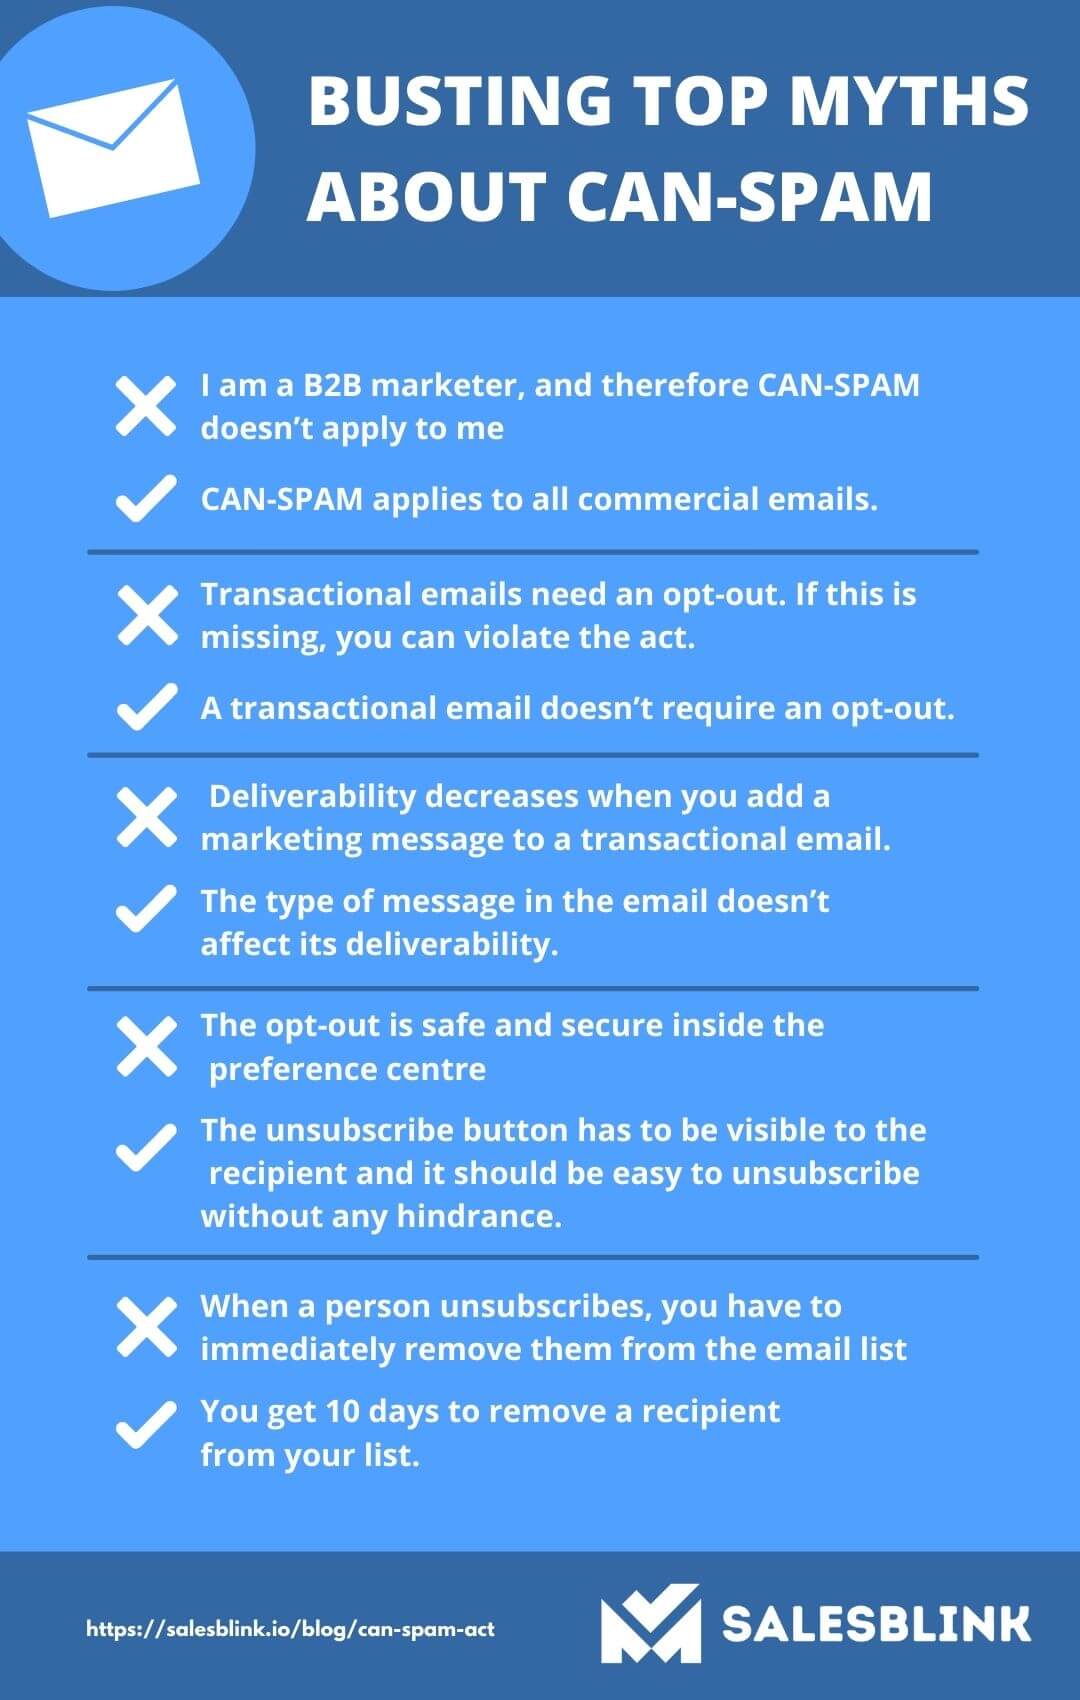 7 Do's & Don'ts You Must Know To Comply With CANSPAM Act